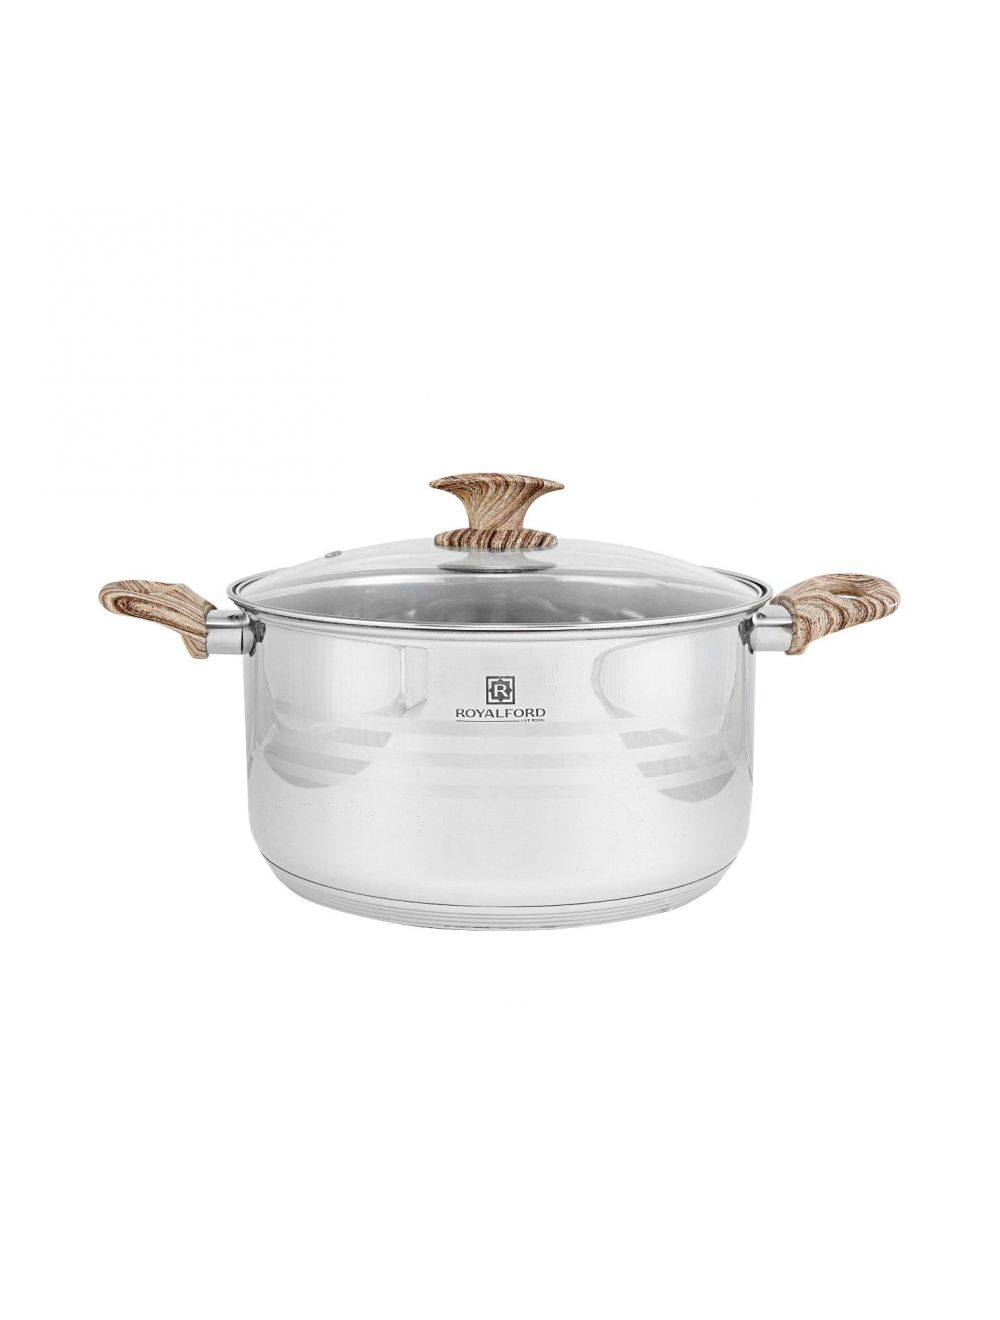 Royalford RF8549 26cm Stainless Steel Casserole with Glass Lid